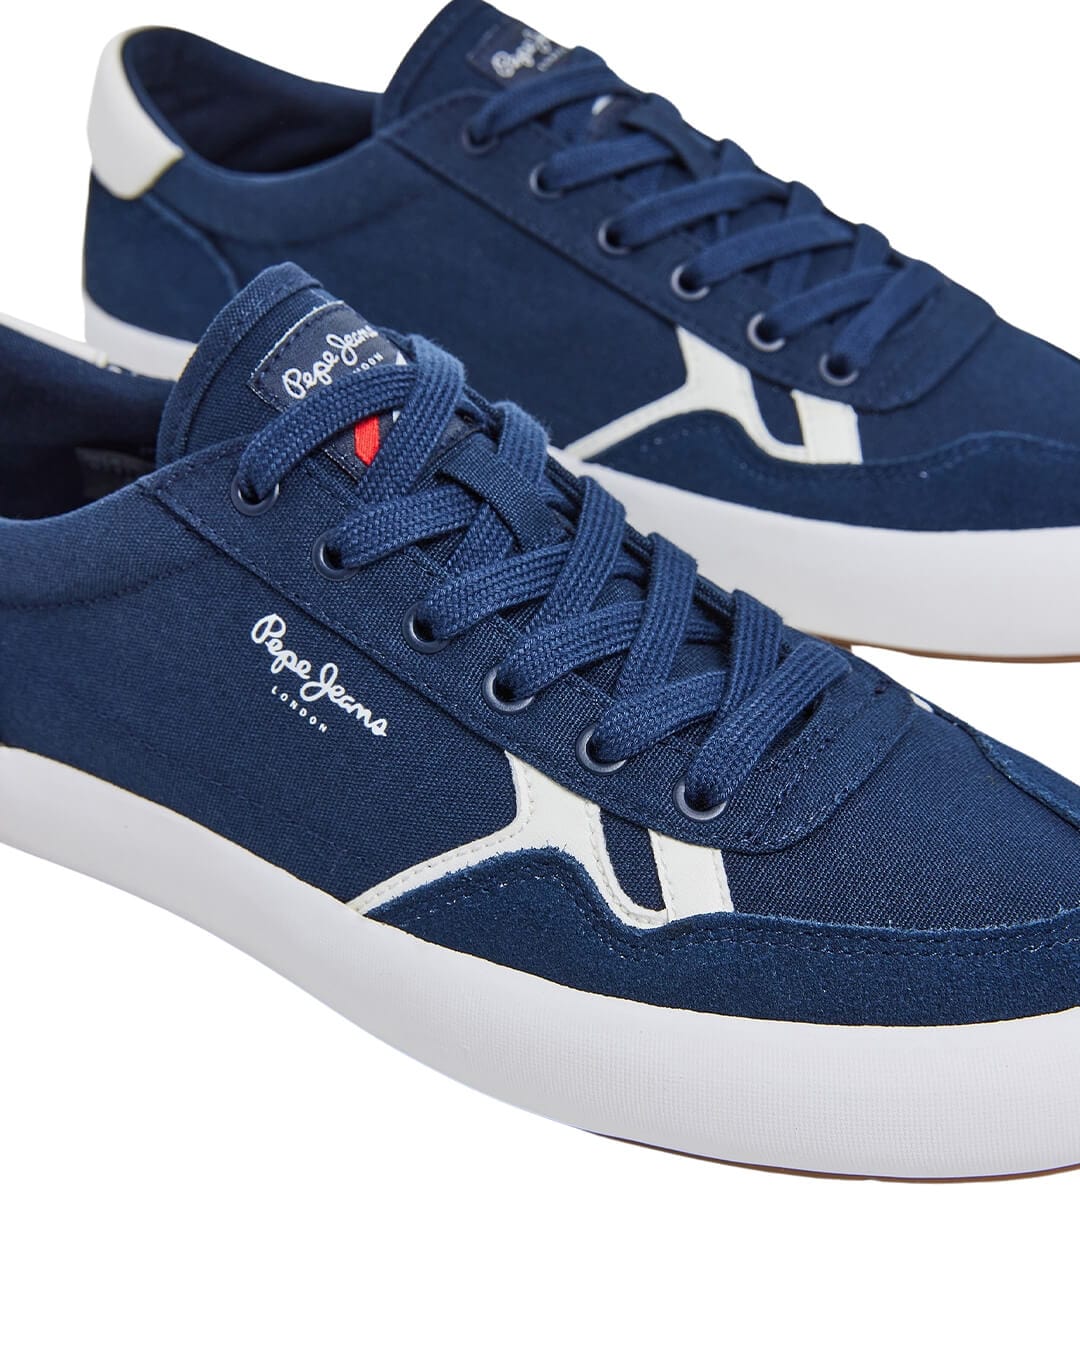 Pepe Jeans Shoes Pepe Jeans Navy Cotton Cupsole Trainers